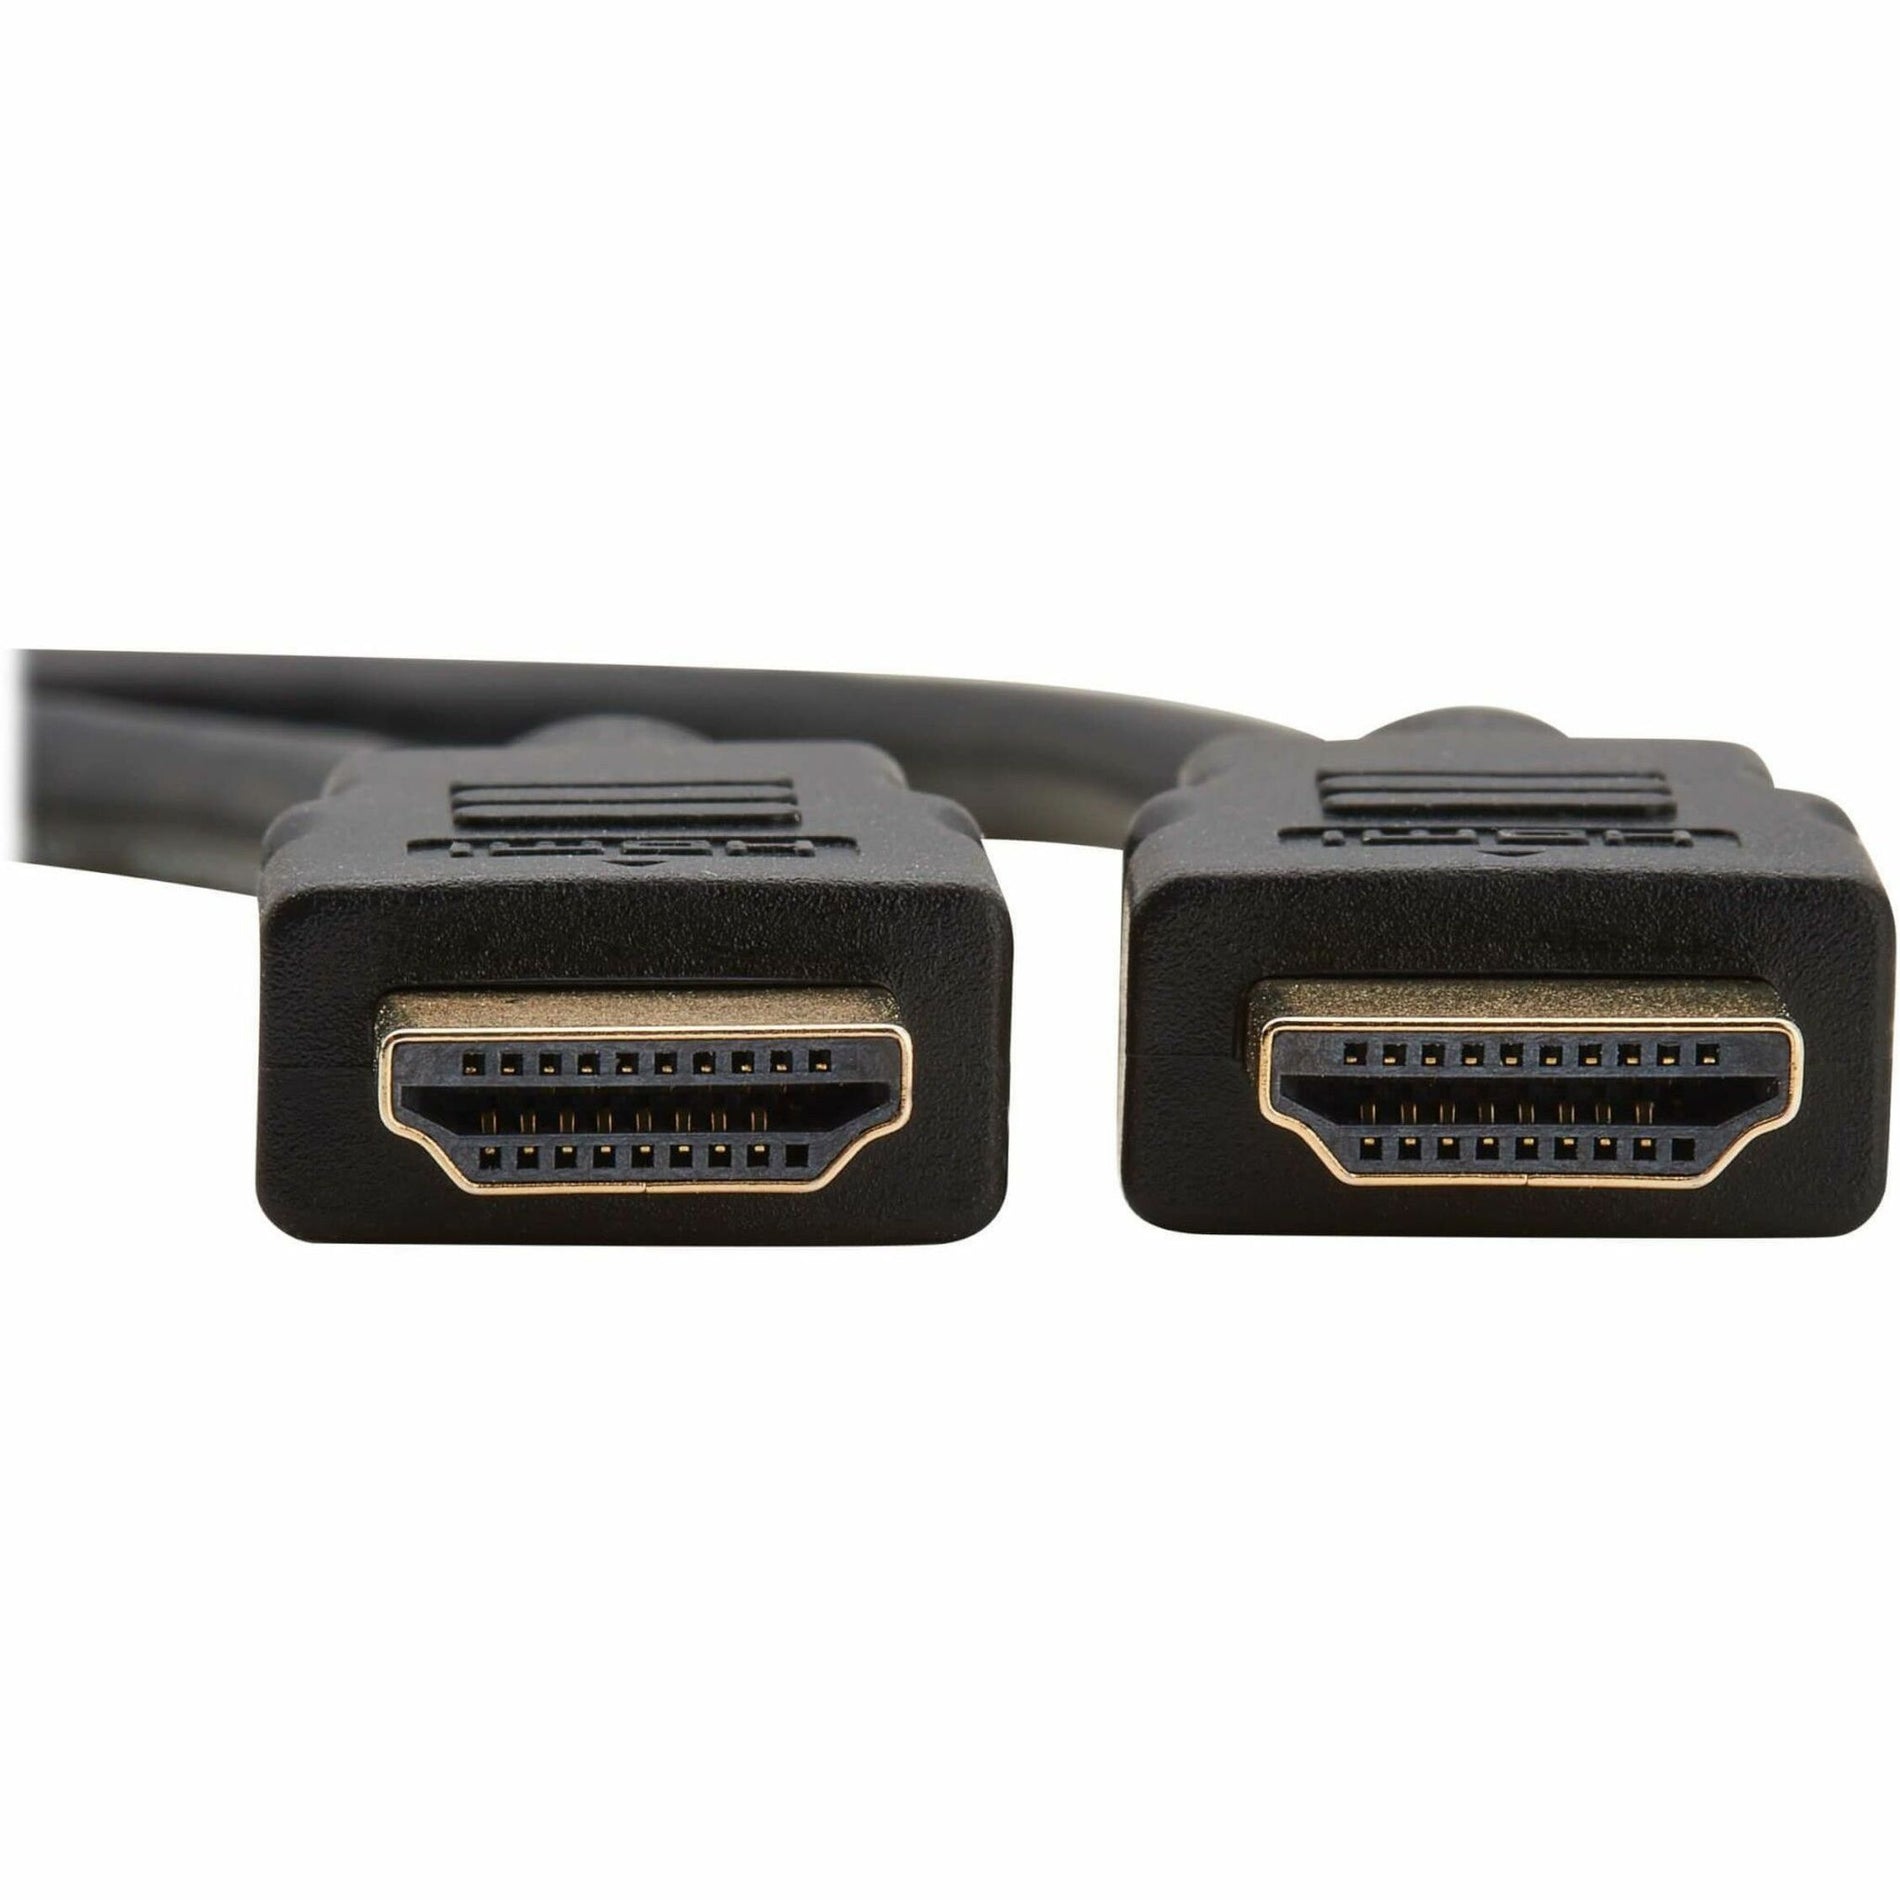 Tripp Lite P568-003 HDMI Cable, 3 ft, EMI/RF Protection, 18 Gbit/s Data Transfer Rate, 3840 x 2160 Supported Resolution